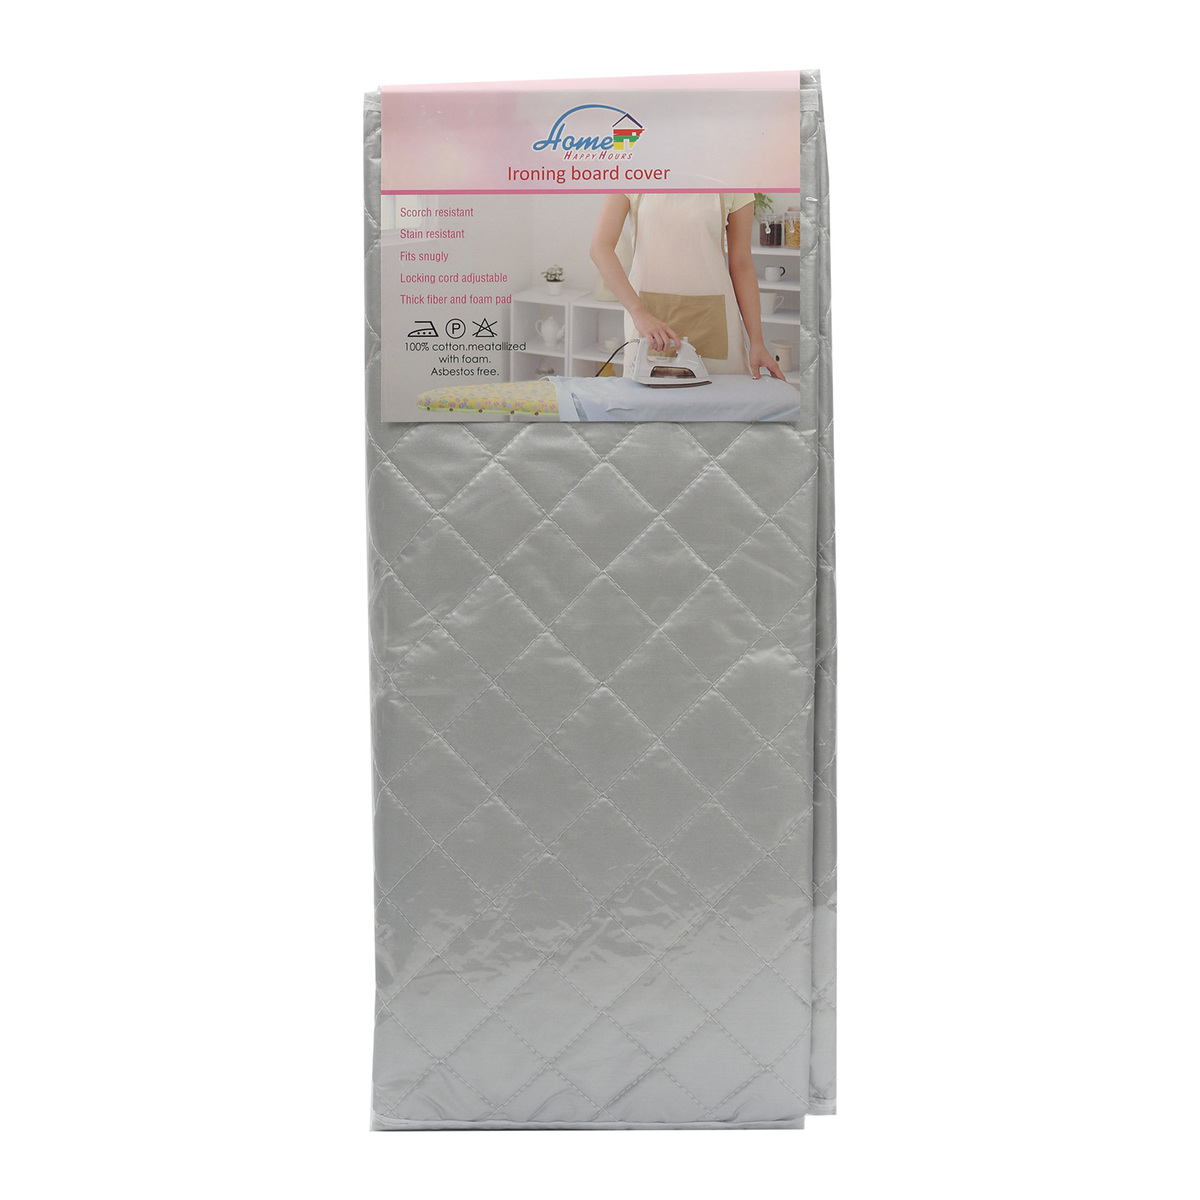 Home Ironing Board Cover XH622-2 150 x 40cm Assorted Color